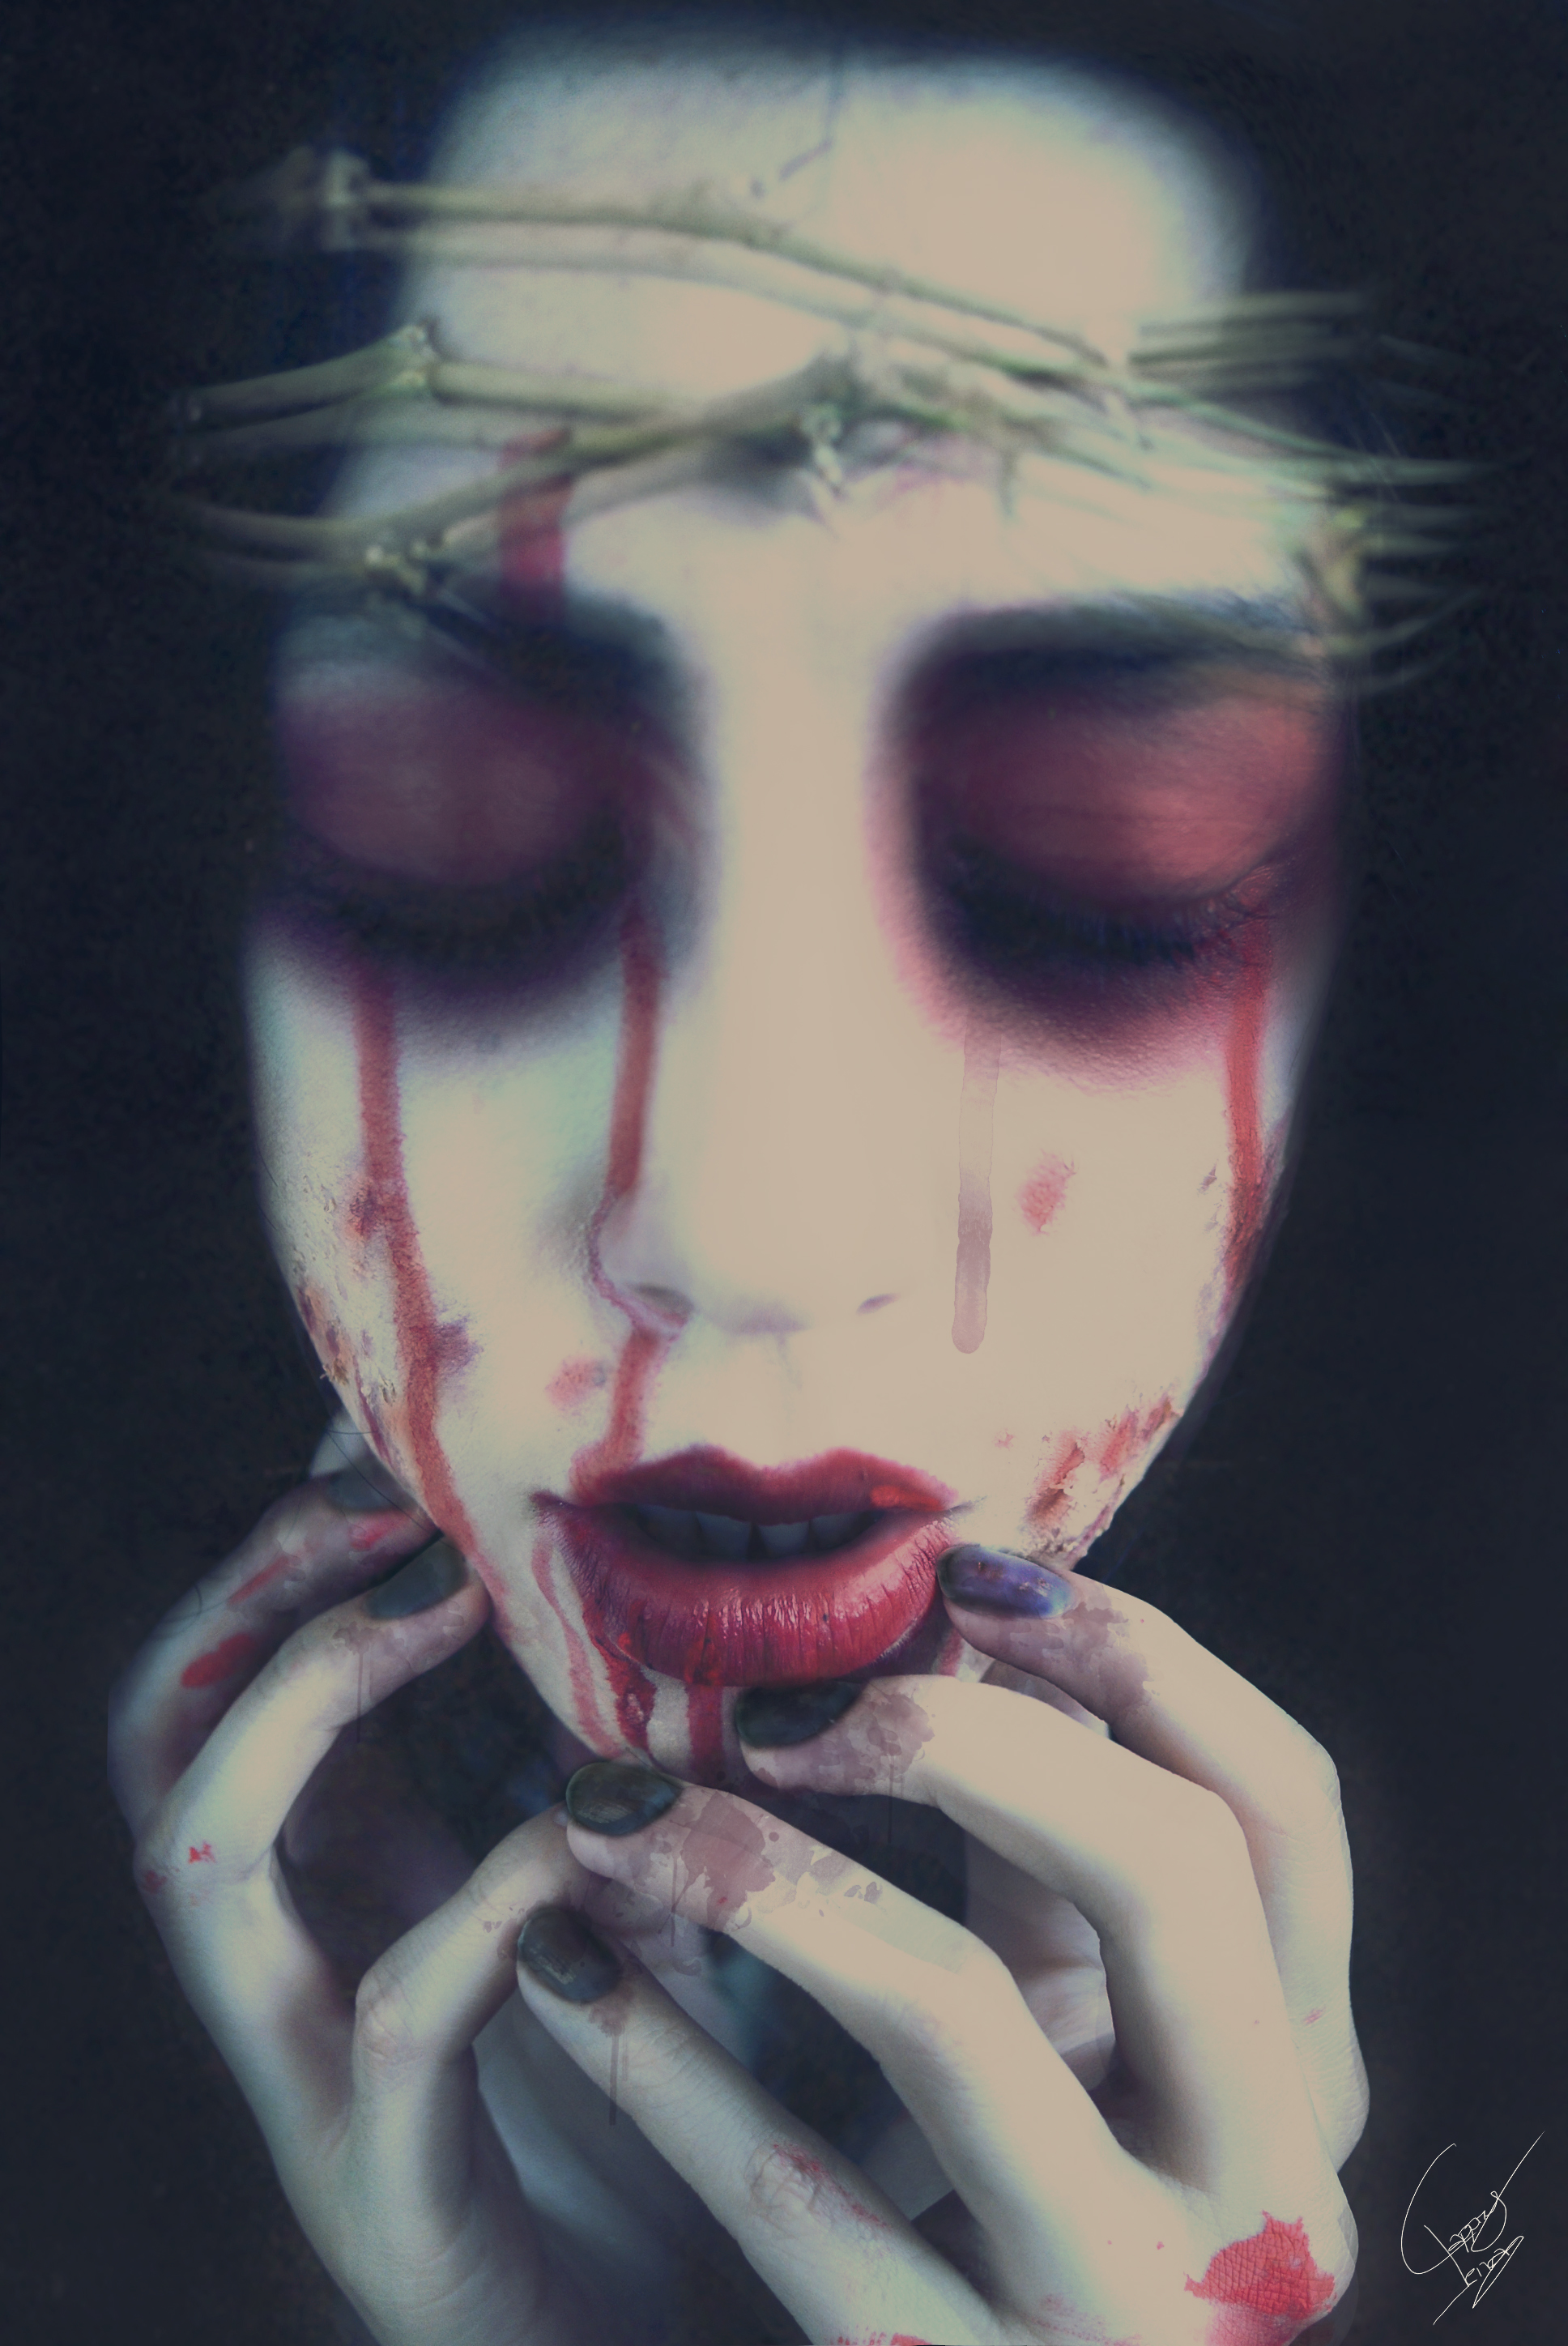 People 1936x2896 TheComtesse (Marion D' Angoulême) photo manipulation creepy blood horror photography crown thorns women red lipstick painted nails portrait display signature